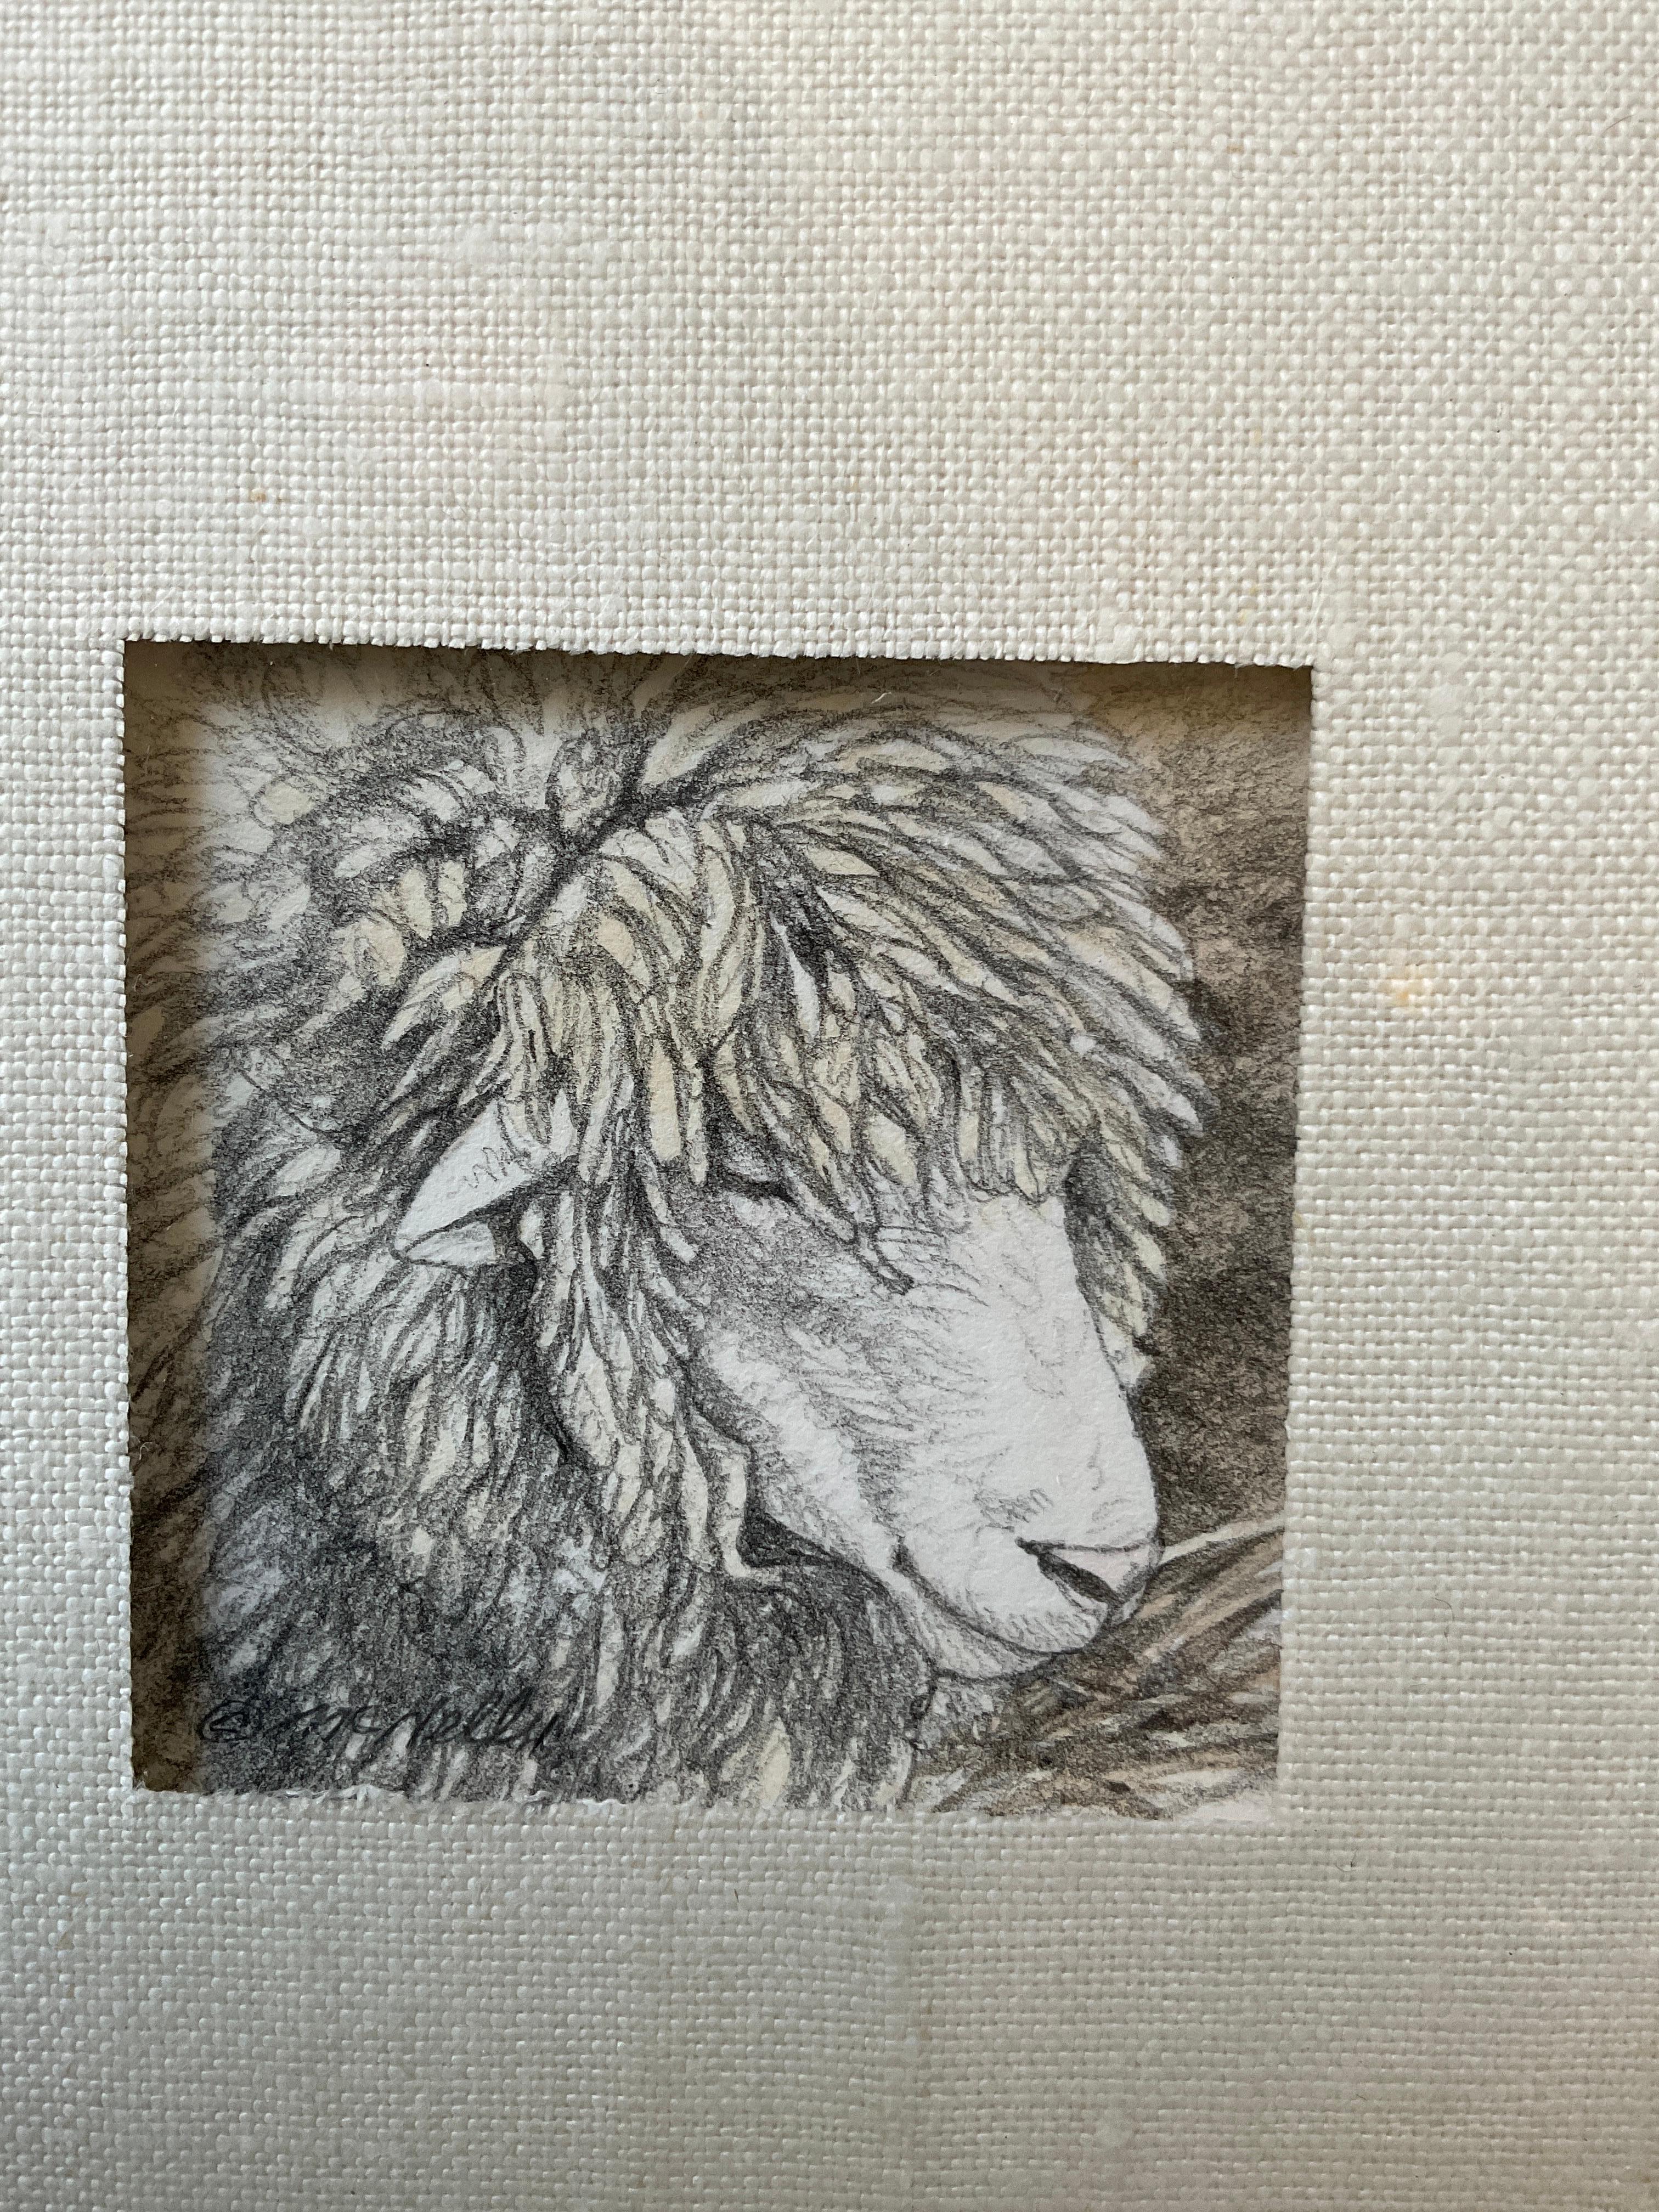 Pencil drawing of a sheep by McNelly.